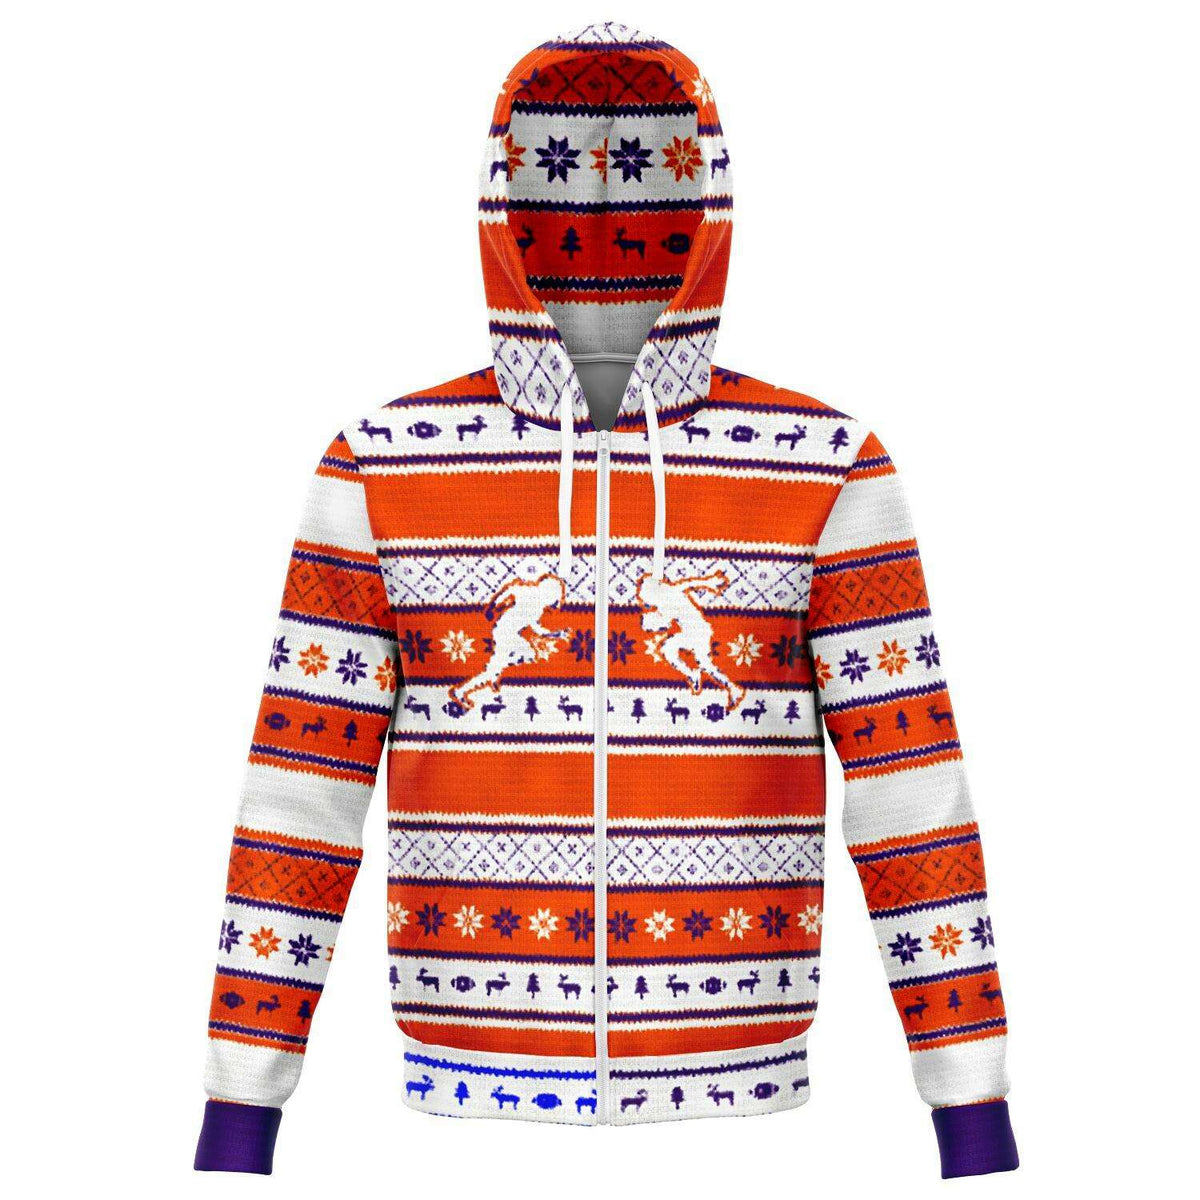 Designs by MyUtopia Shout Out:#More Tiger Pushups Clemson Fan - 3D Ugly Christmas Sweater Style Fashion Zip Hoodie Jacket,XS / Orange/White,Fashion Zip-Up Hoodie - AOP